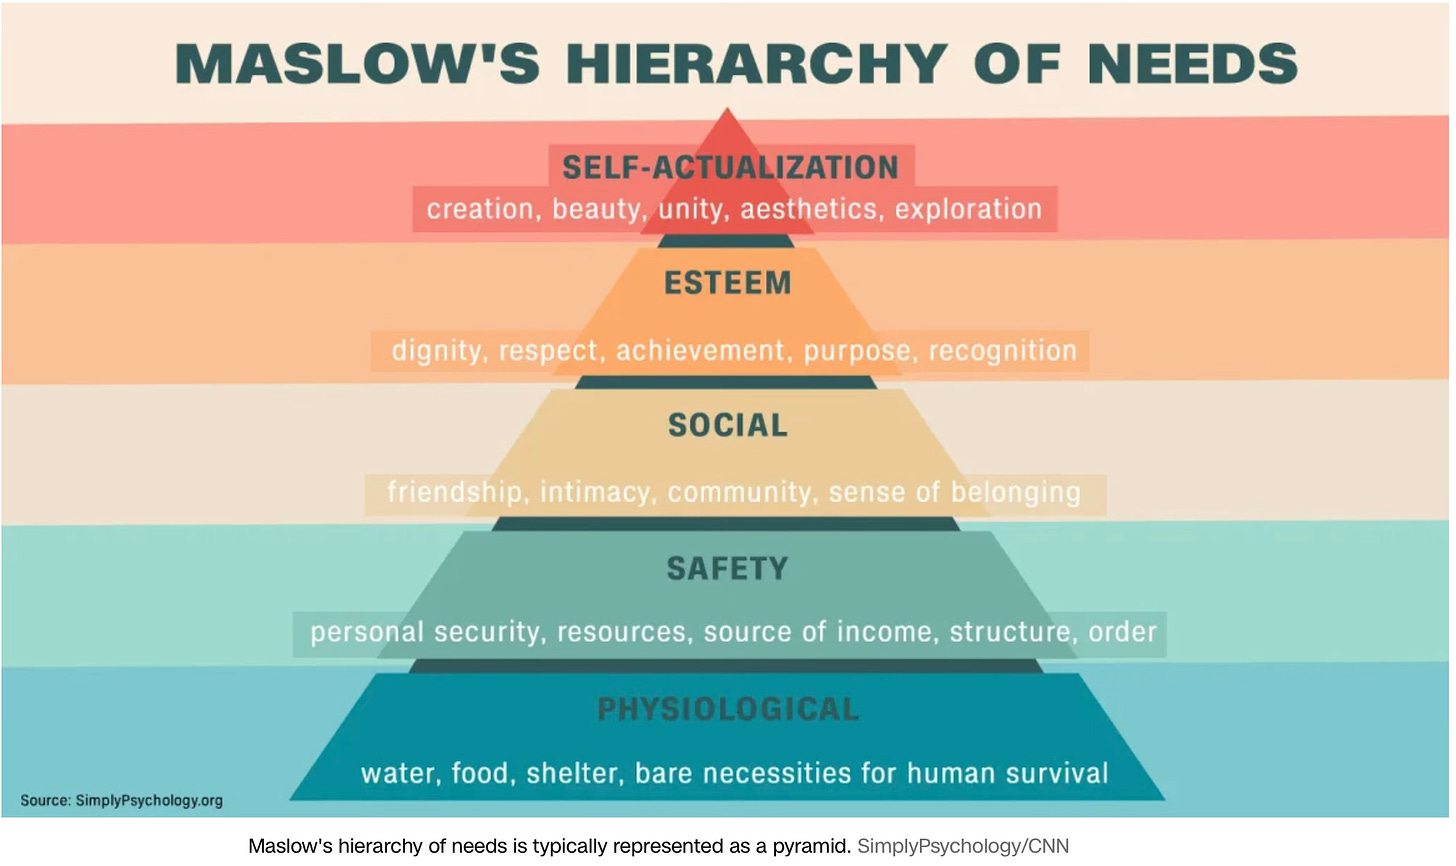 pyramid chart showing Maslow's hierarch of needs